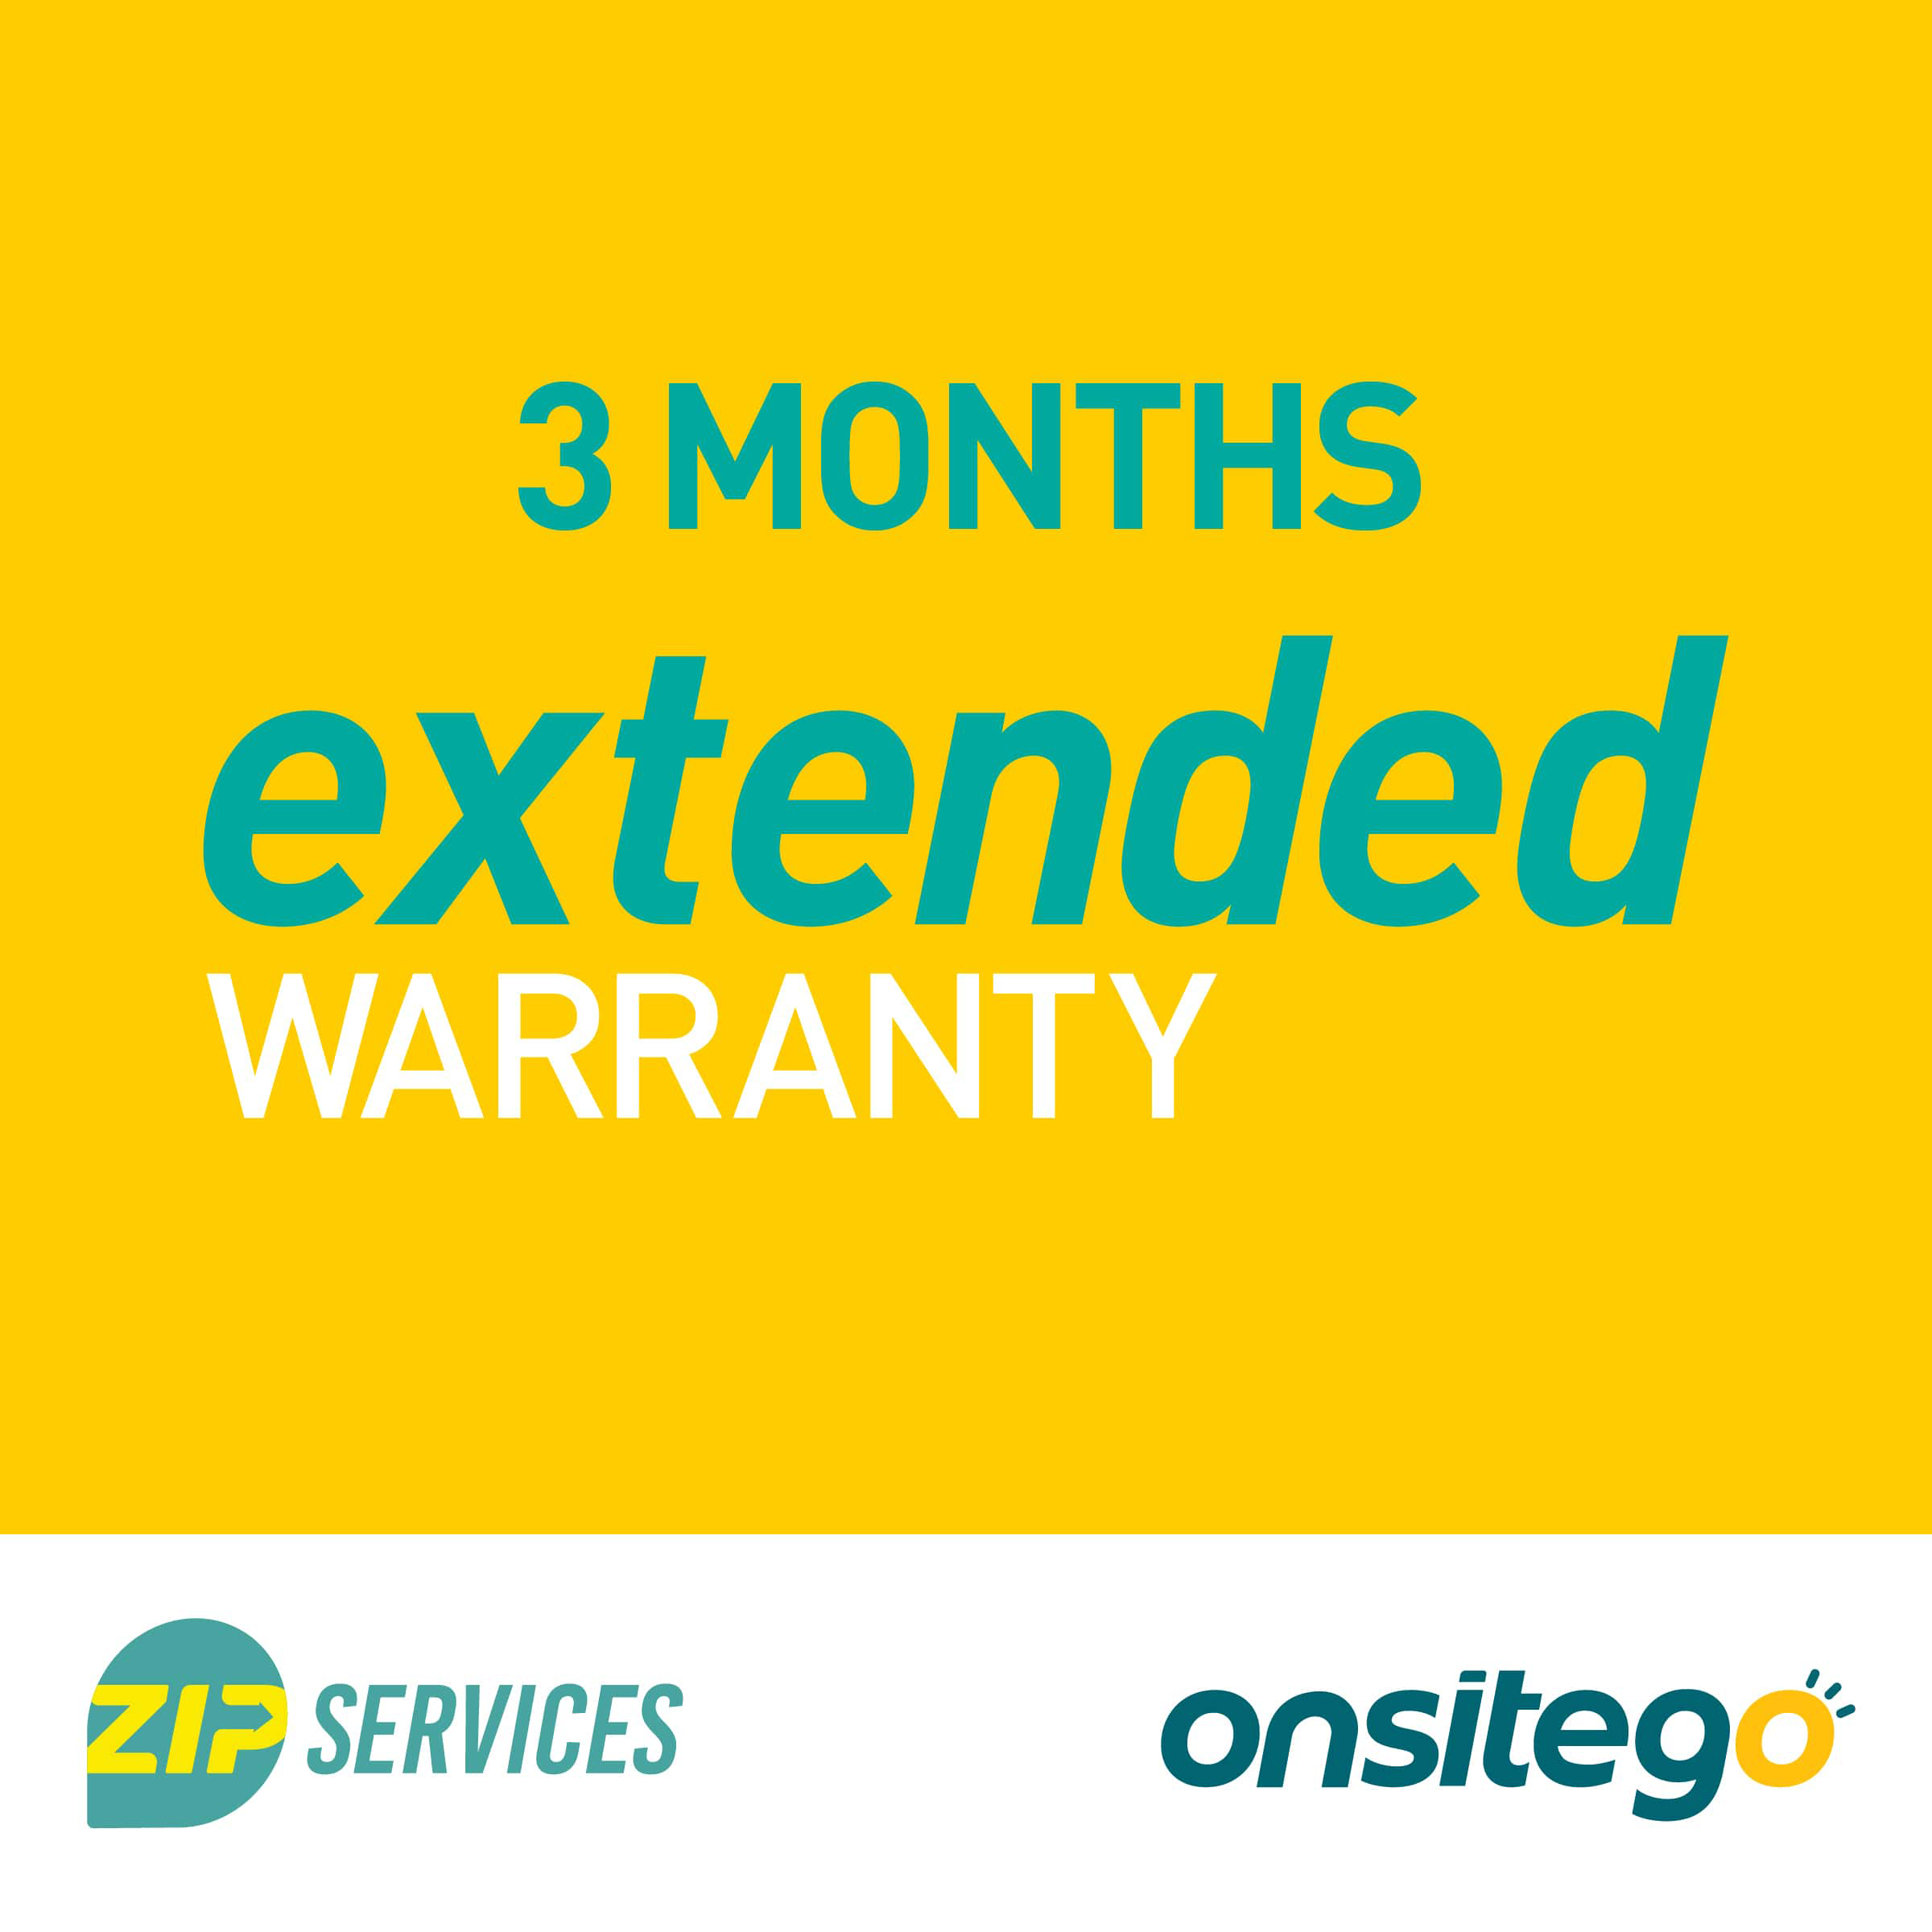 OnsiteGo 3 Months Extended Warranty for PC Accessory  Rs.1501 - Rs.2000_1